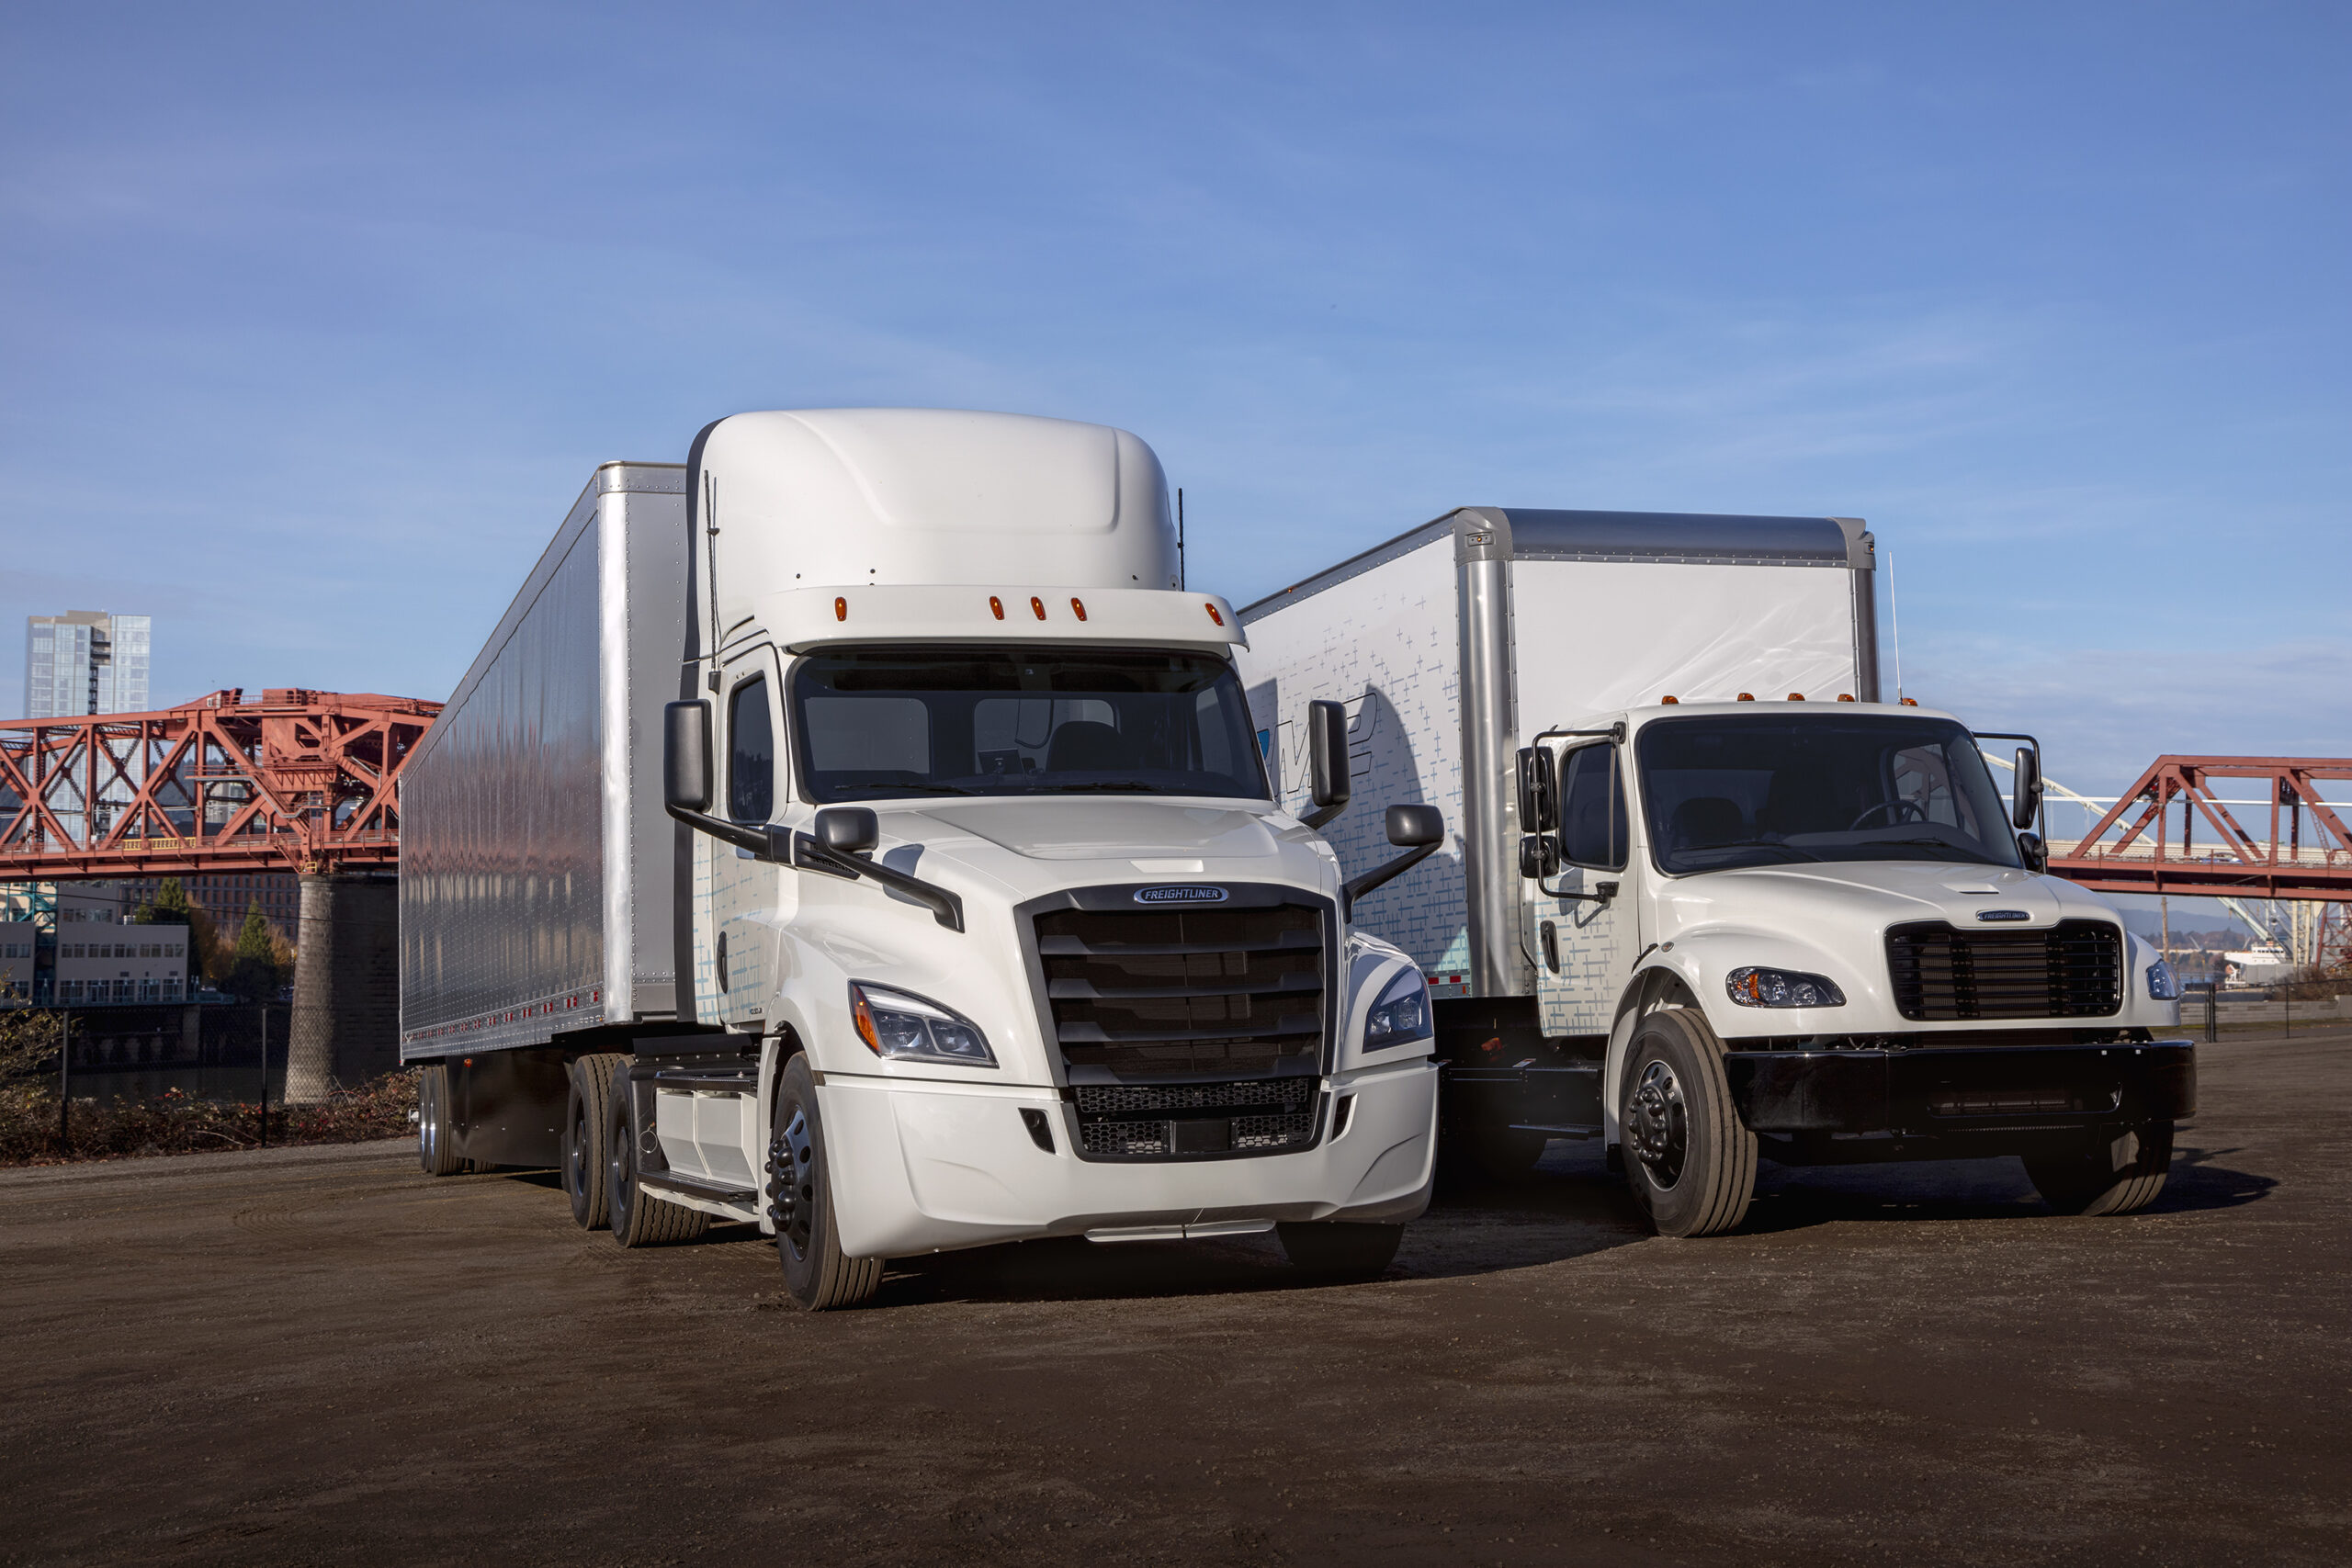 How to Find the Best Freightliner Tampa Dealerships